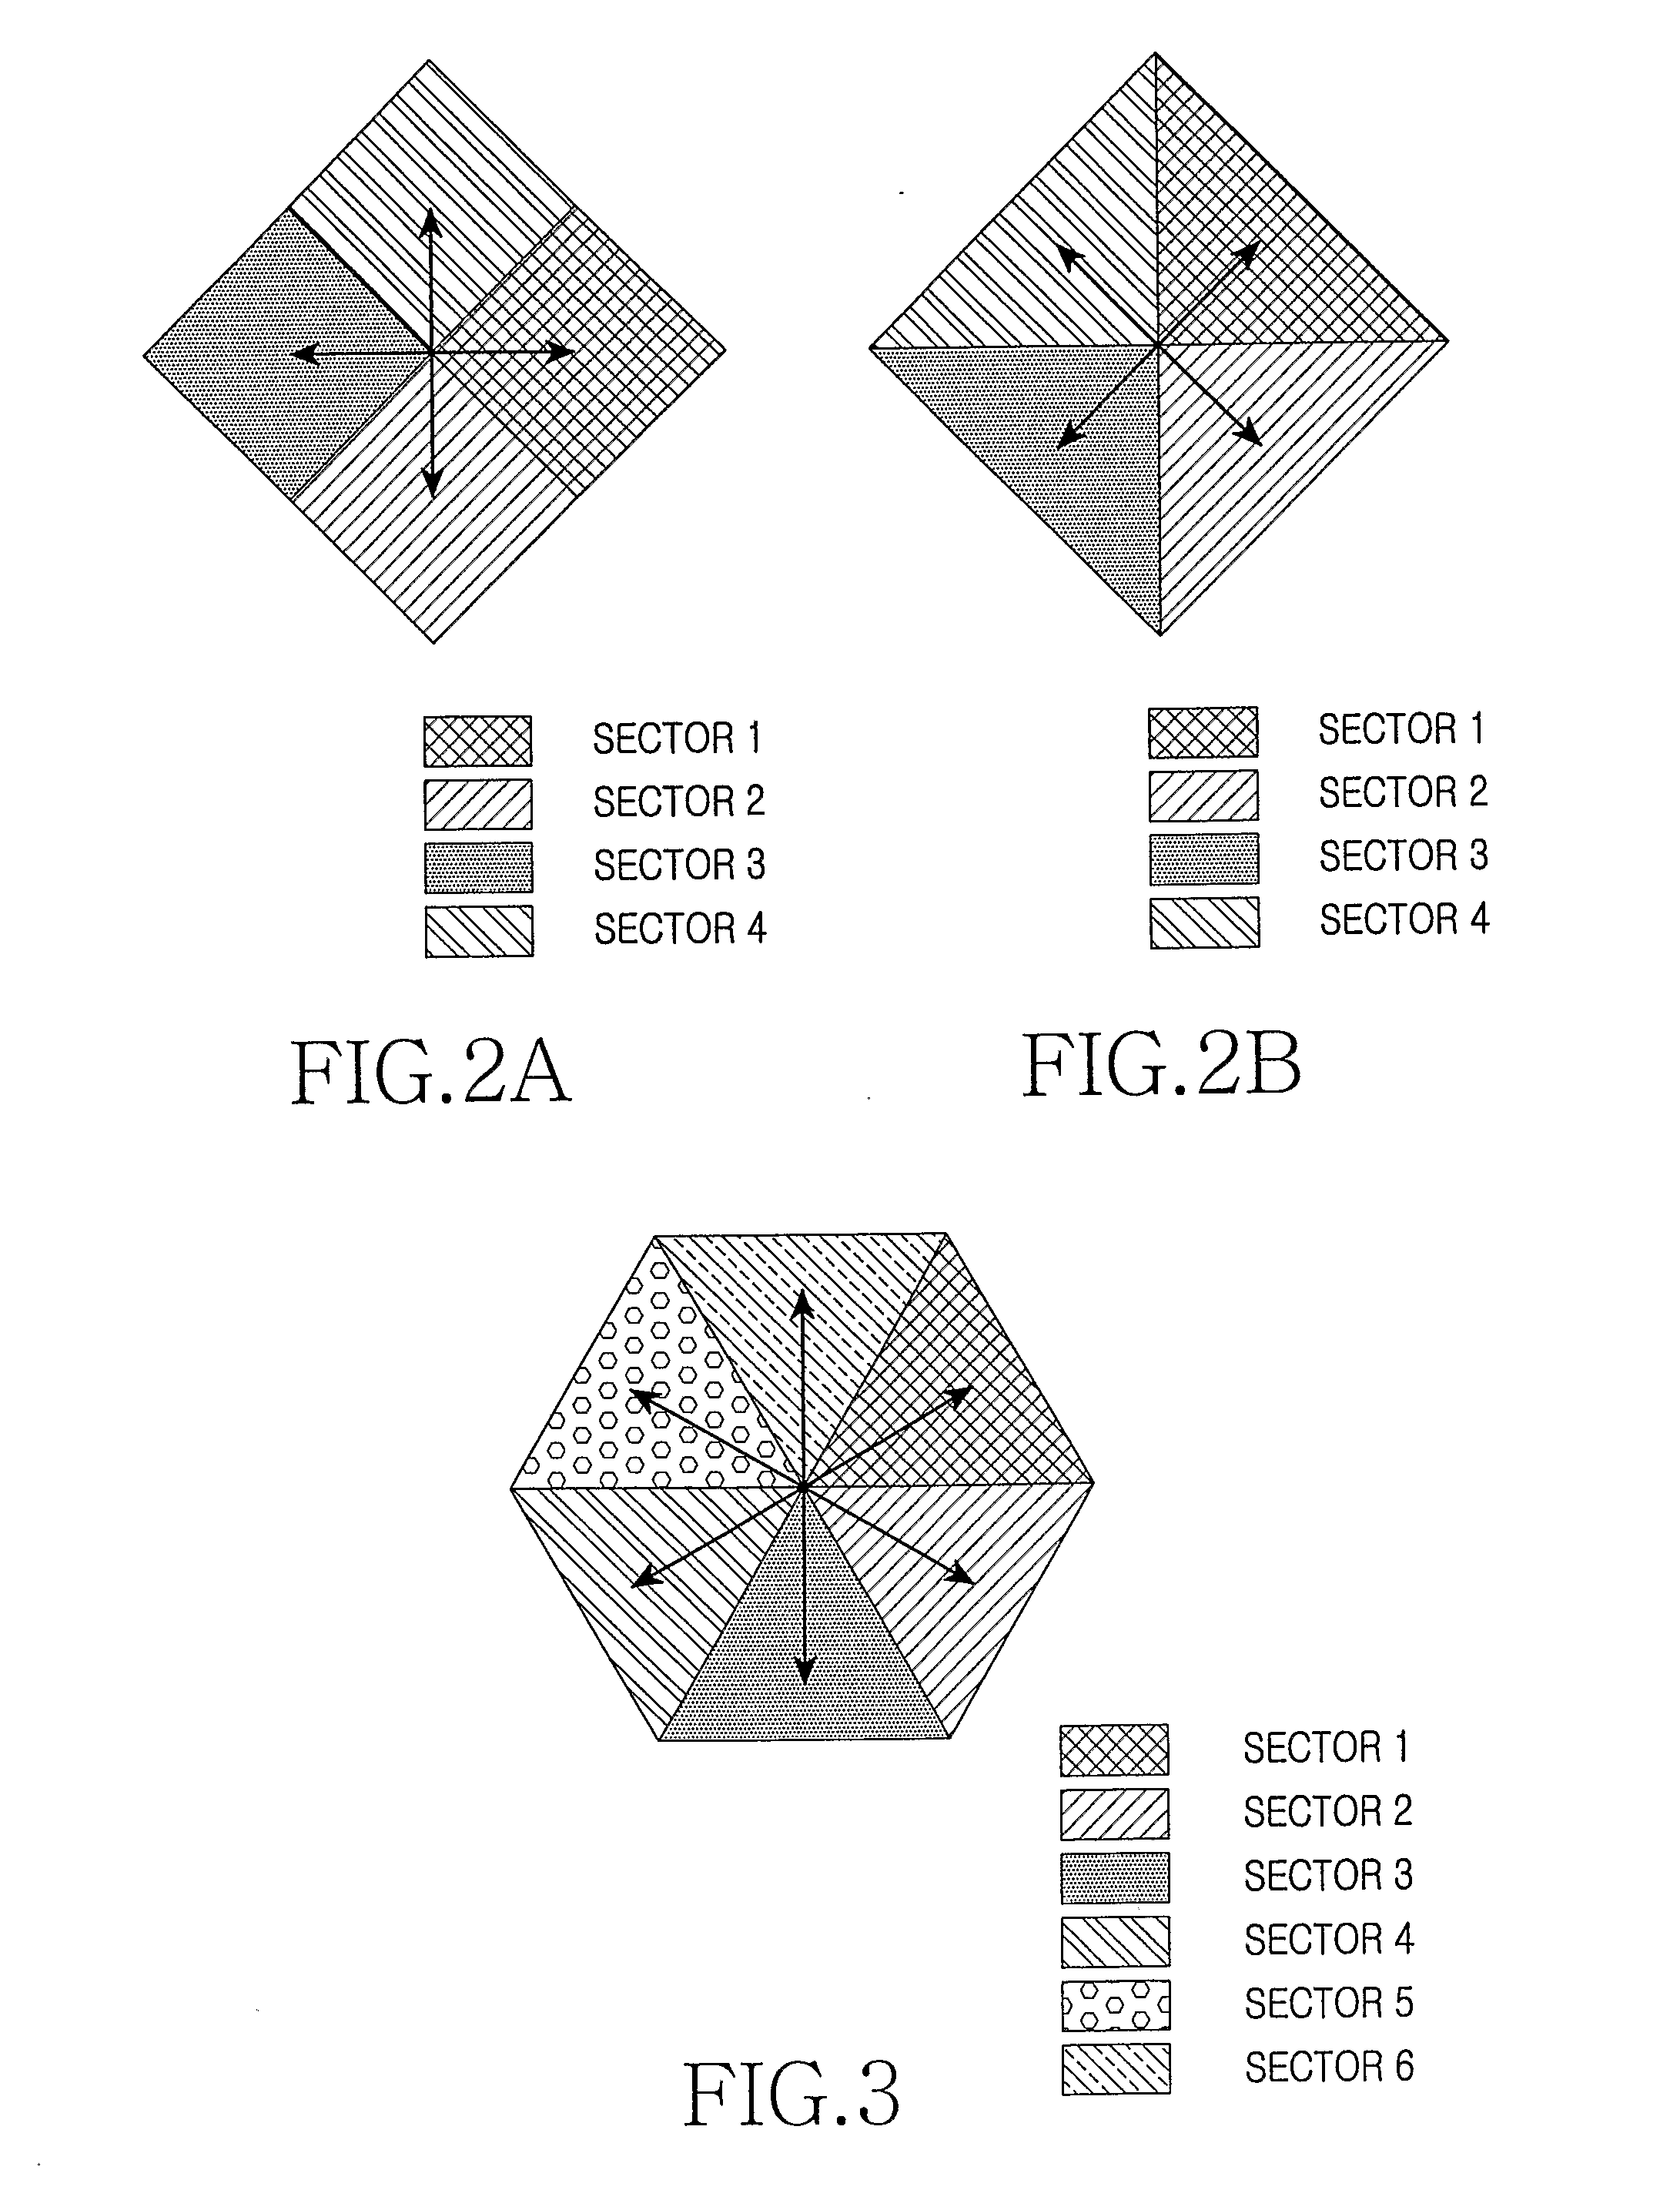 System and method for utilizing resources in a communication system